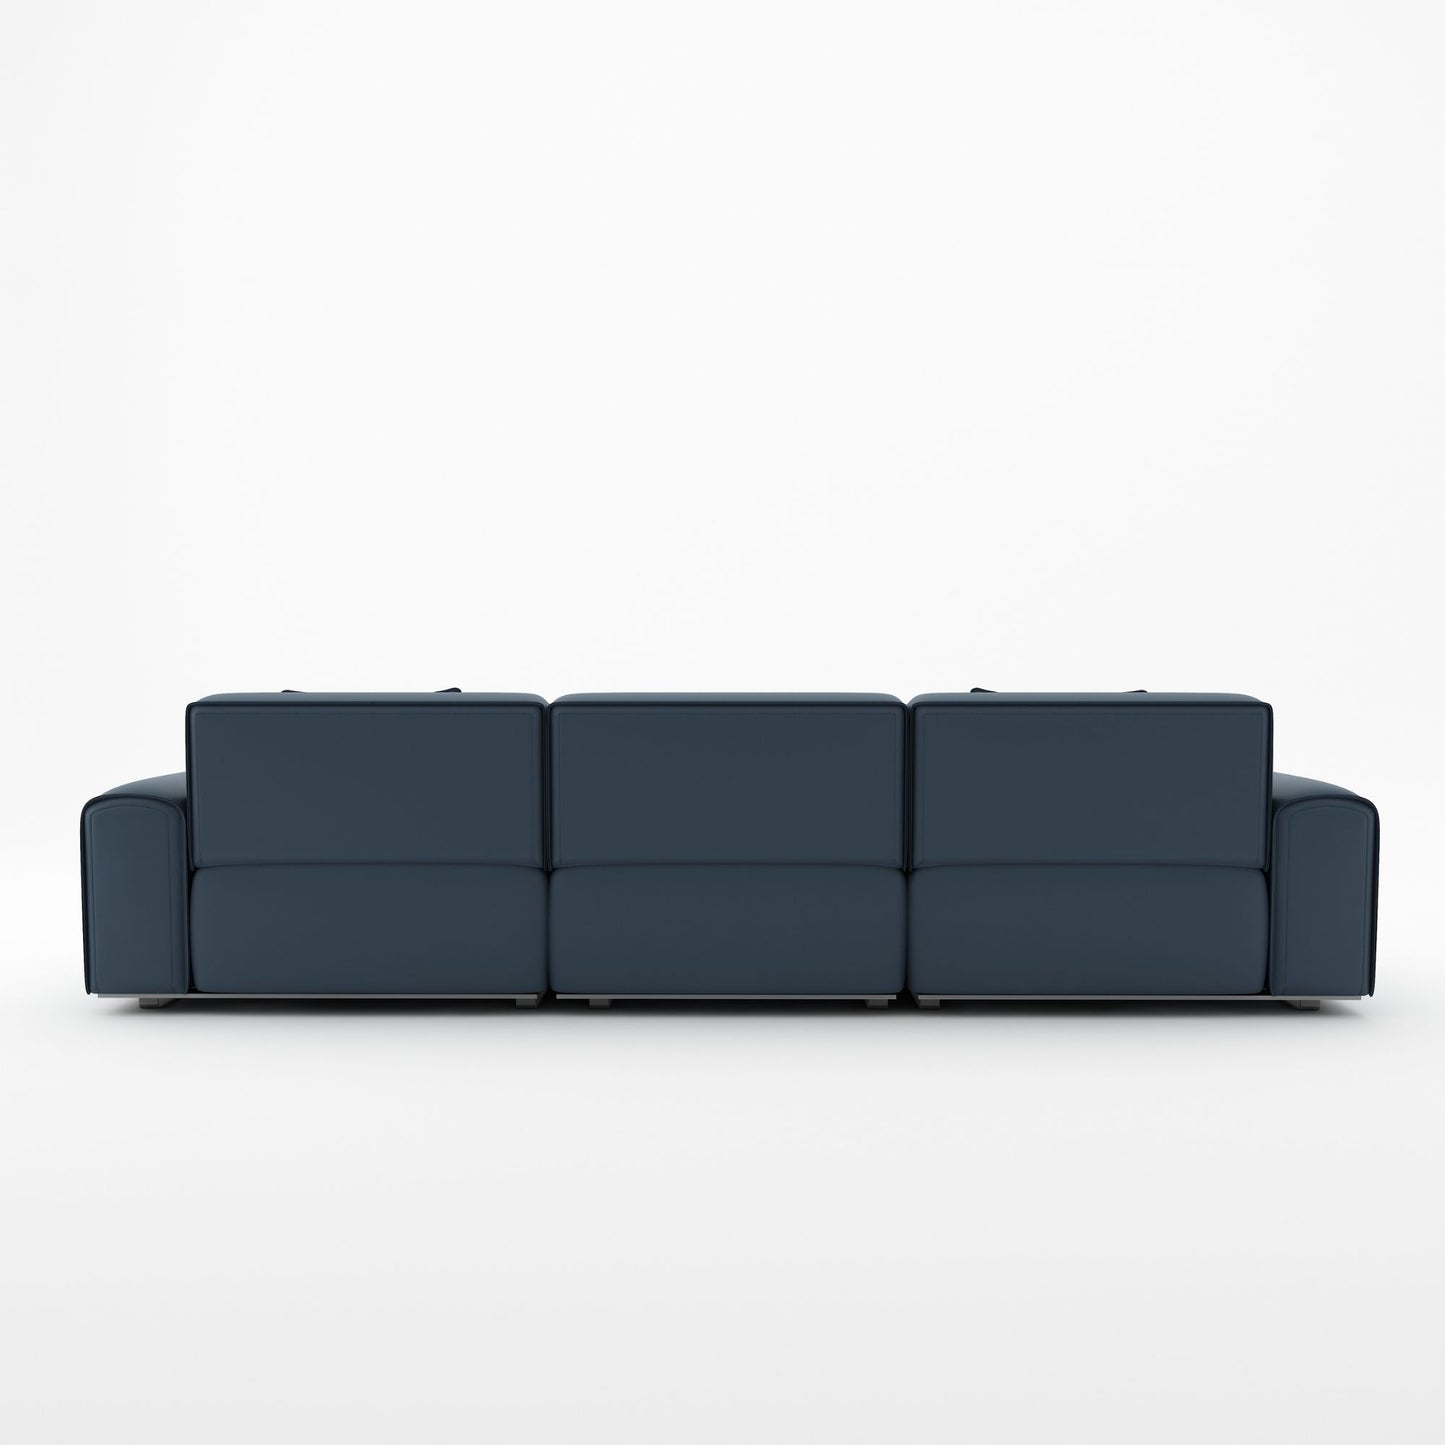 Colby blue top grain full leather 3 seat sofa